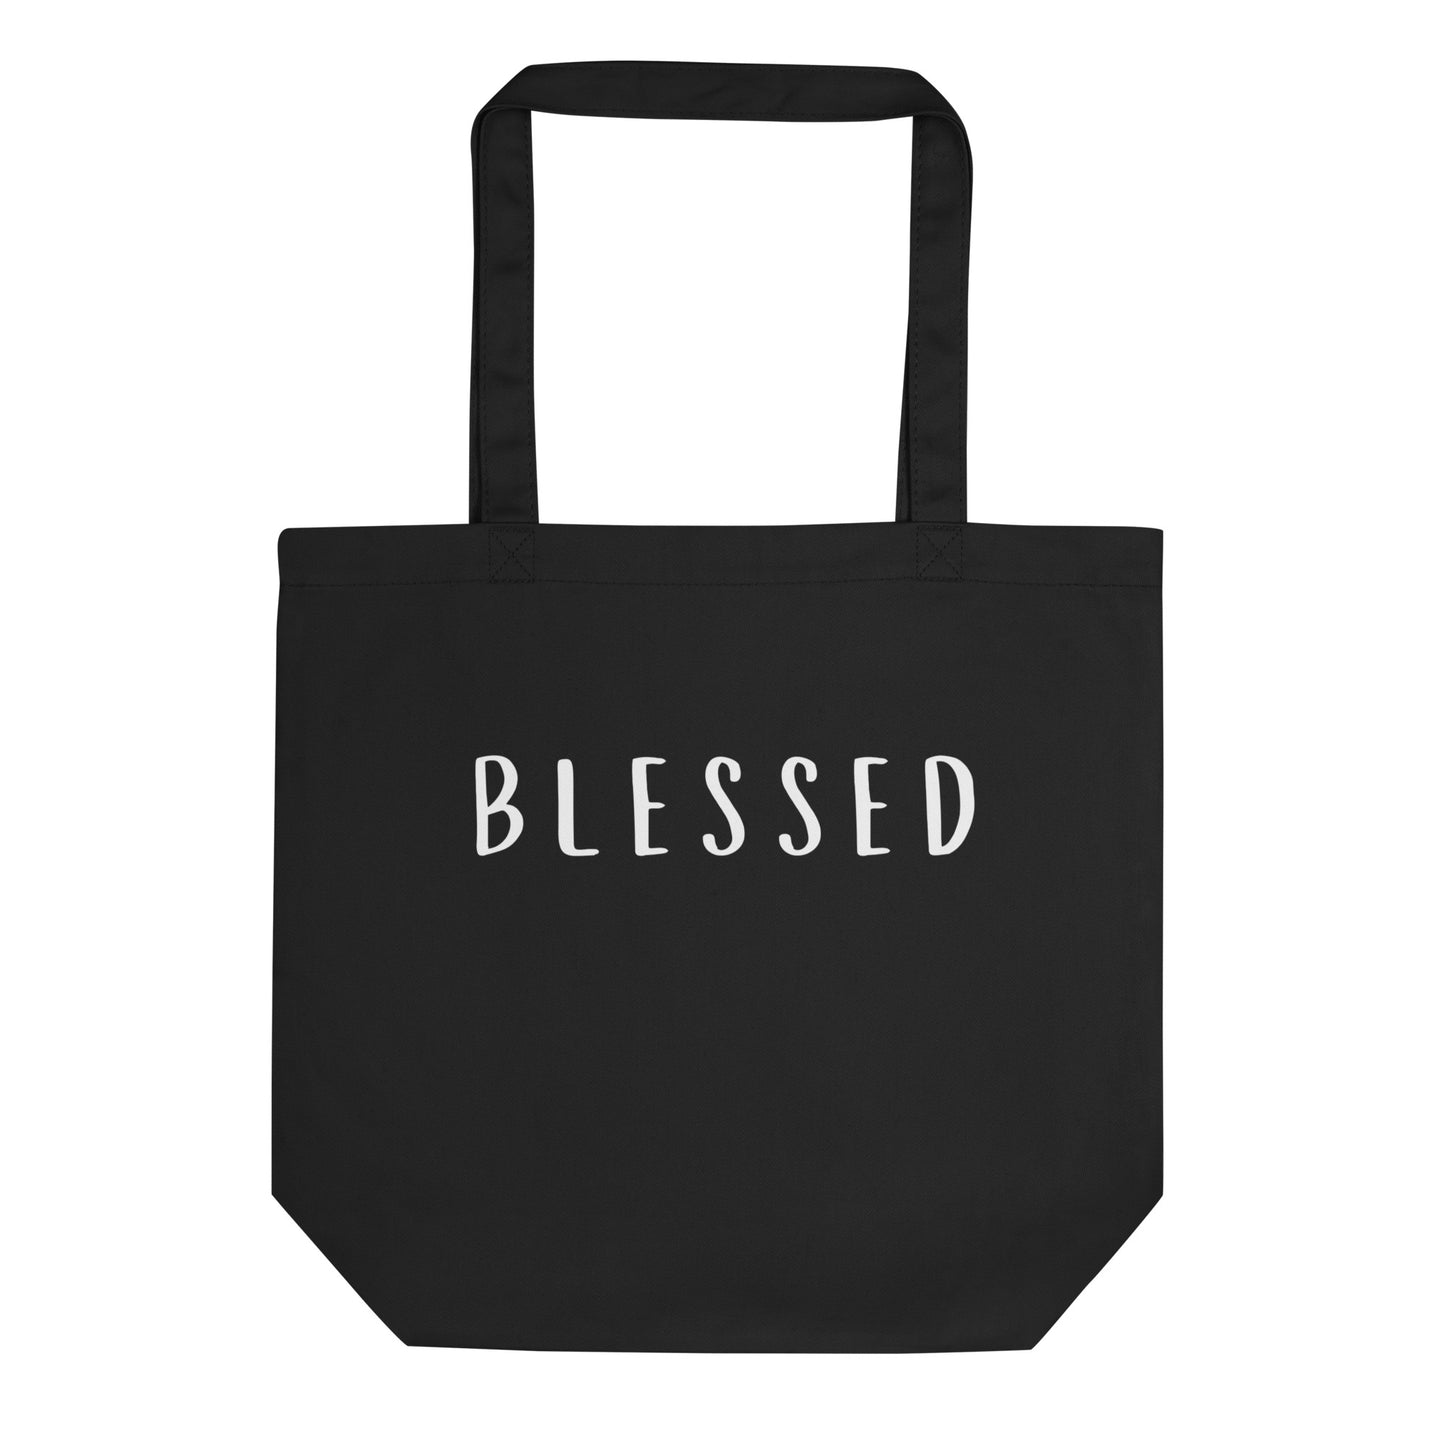 Blessed! inspirational Eco Tote Bag